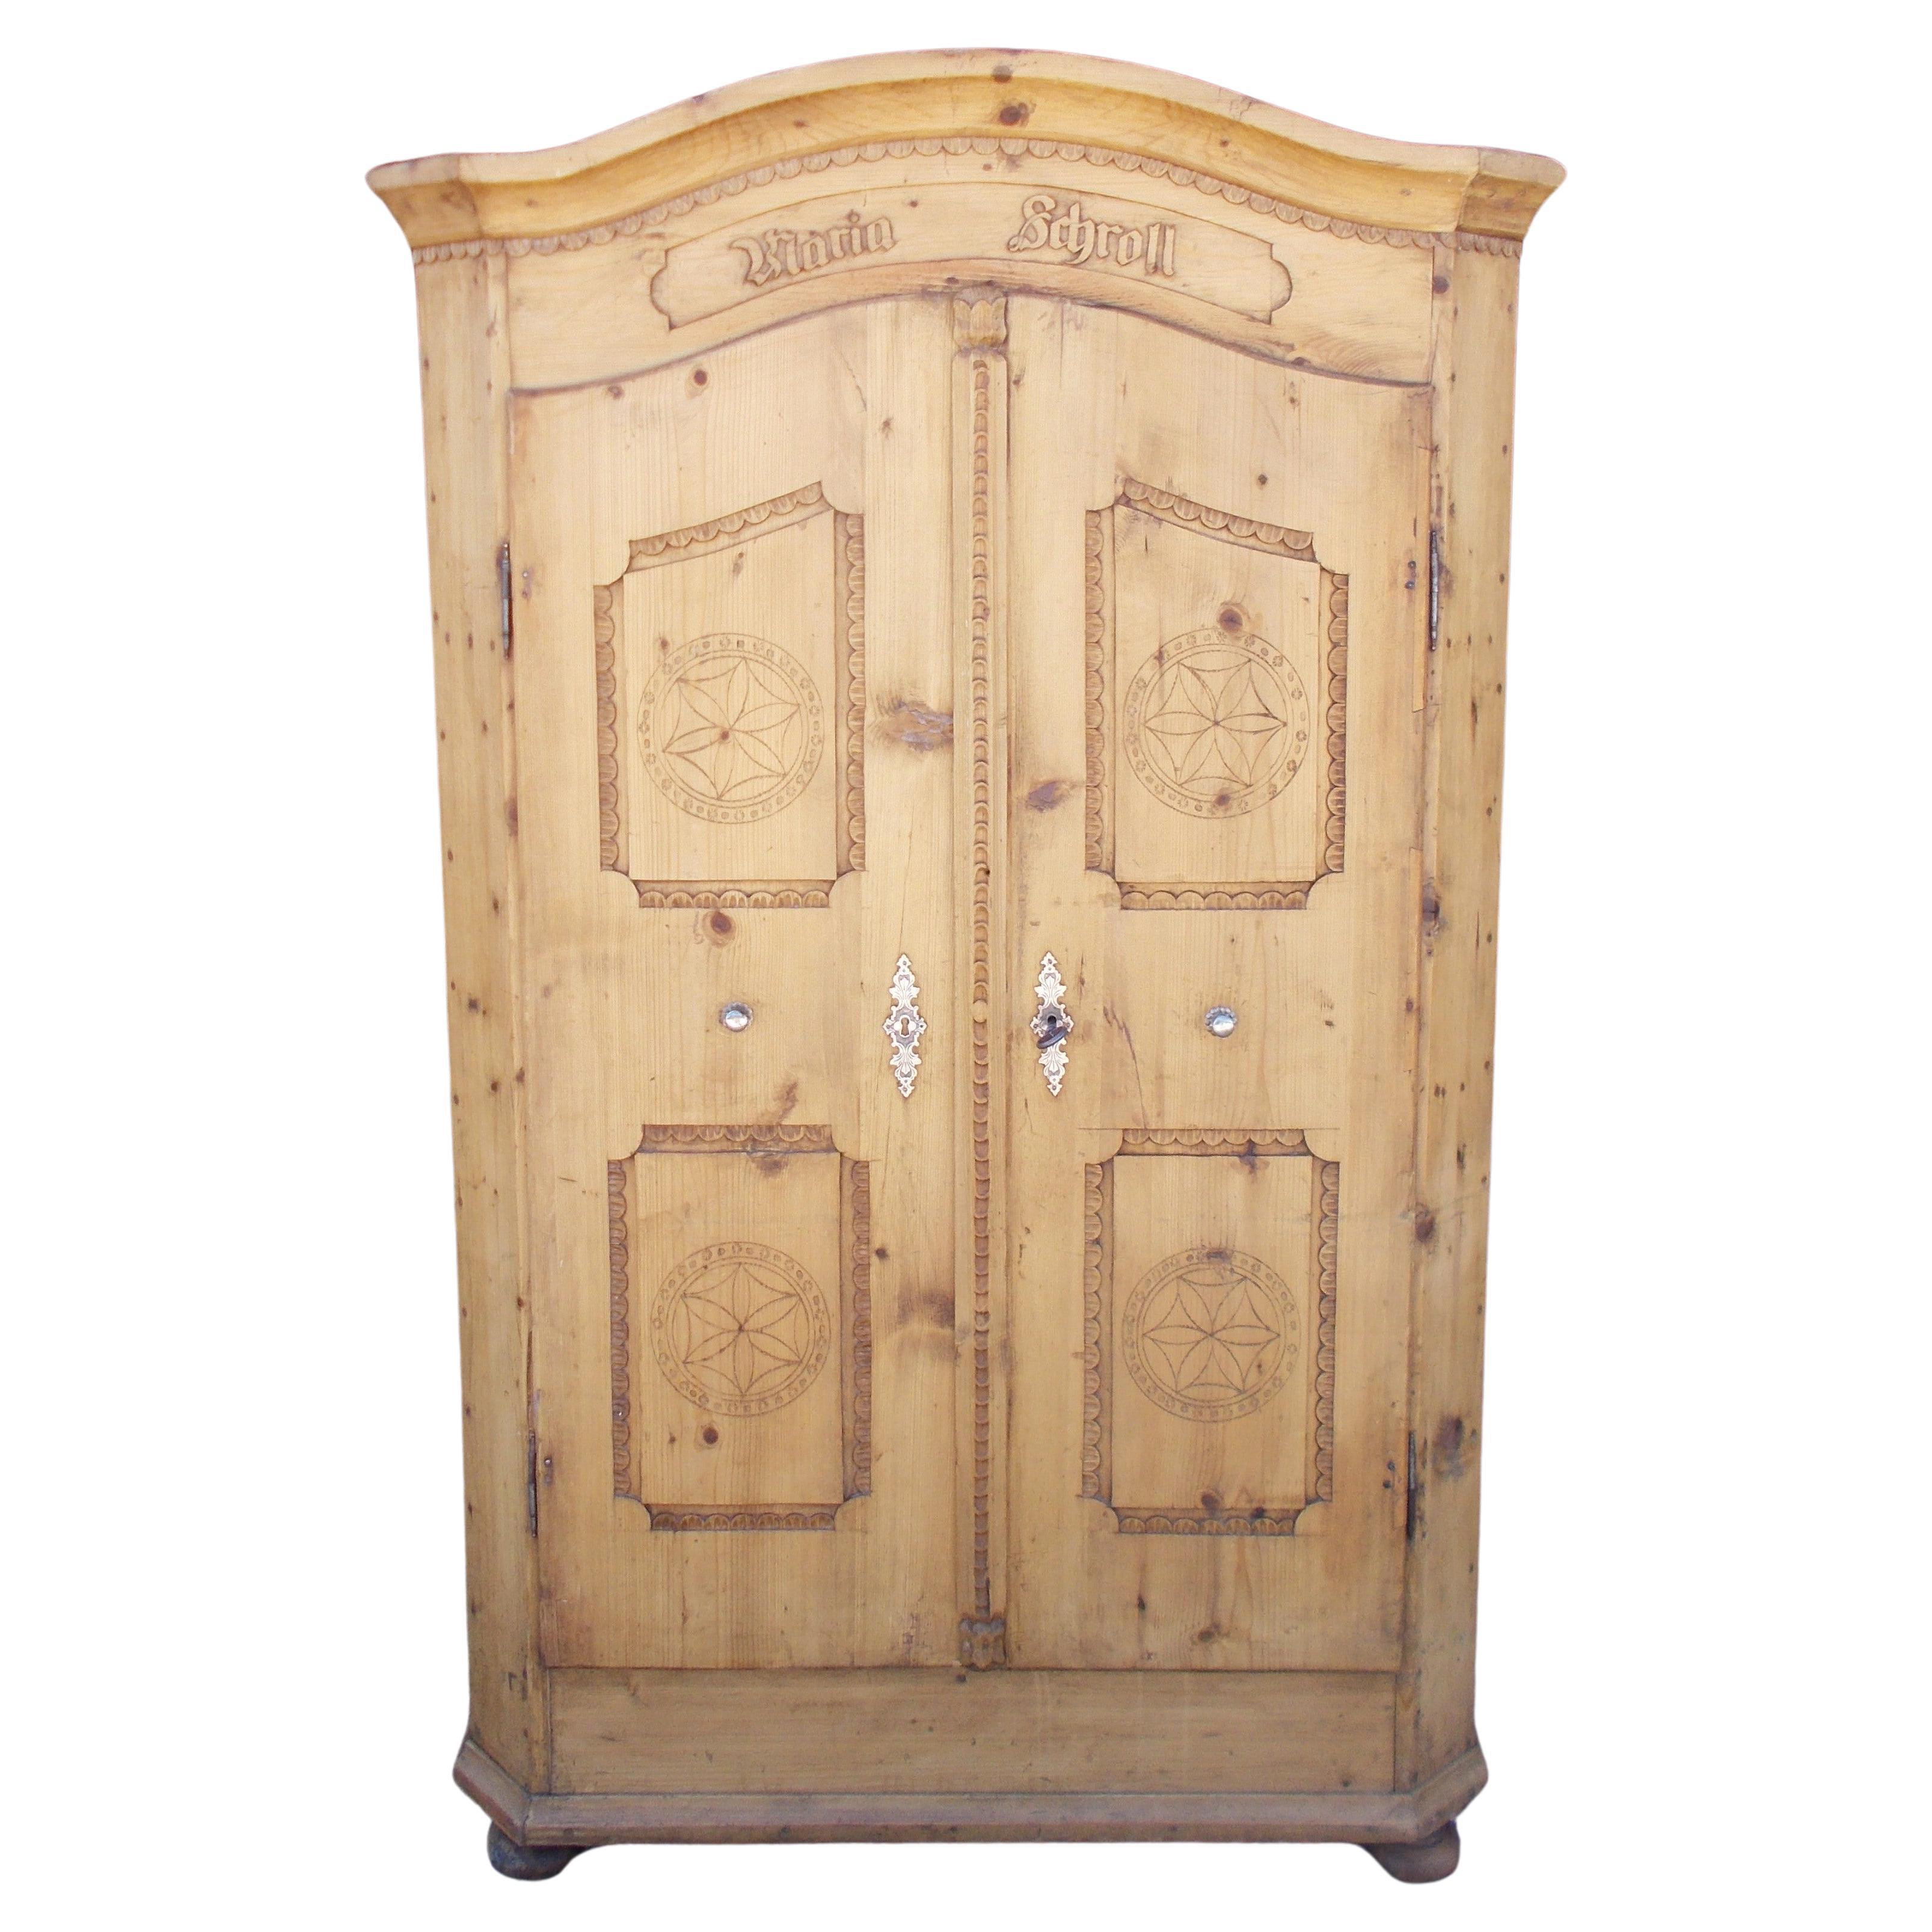 Cirmolo closet in rustic country art style For Sale